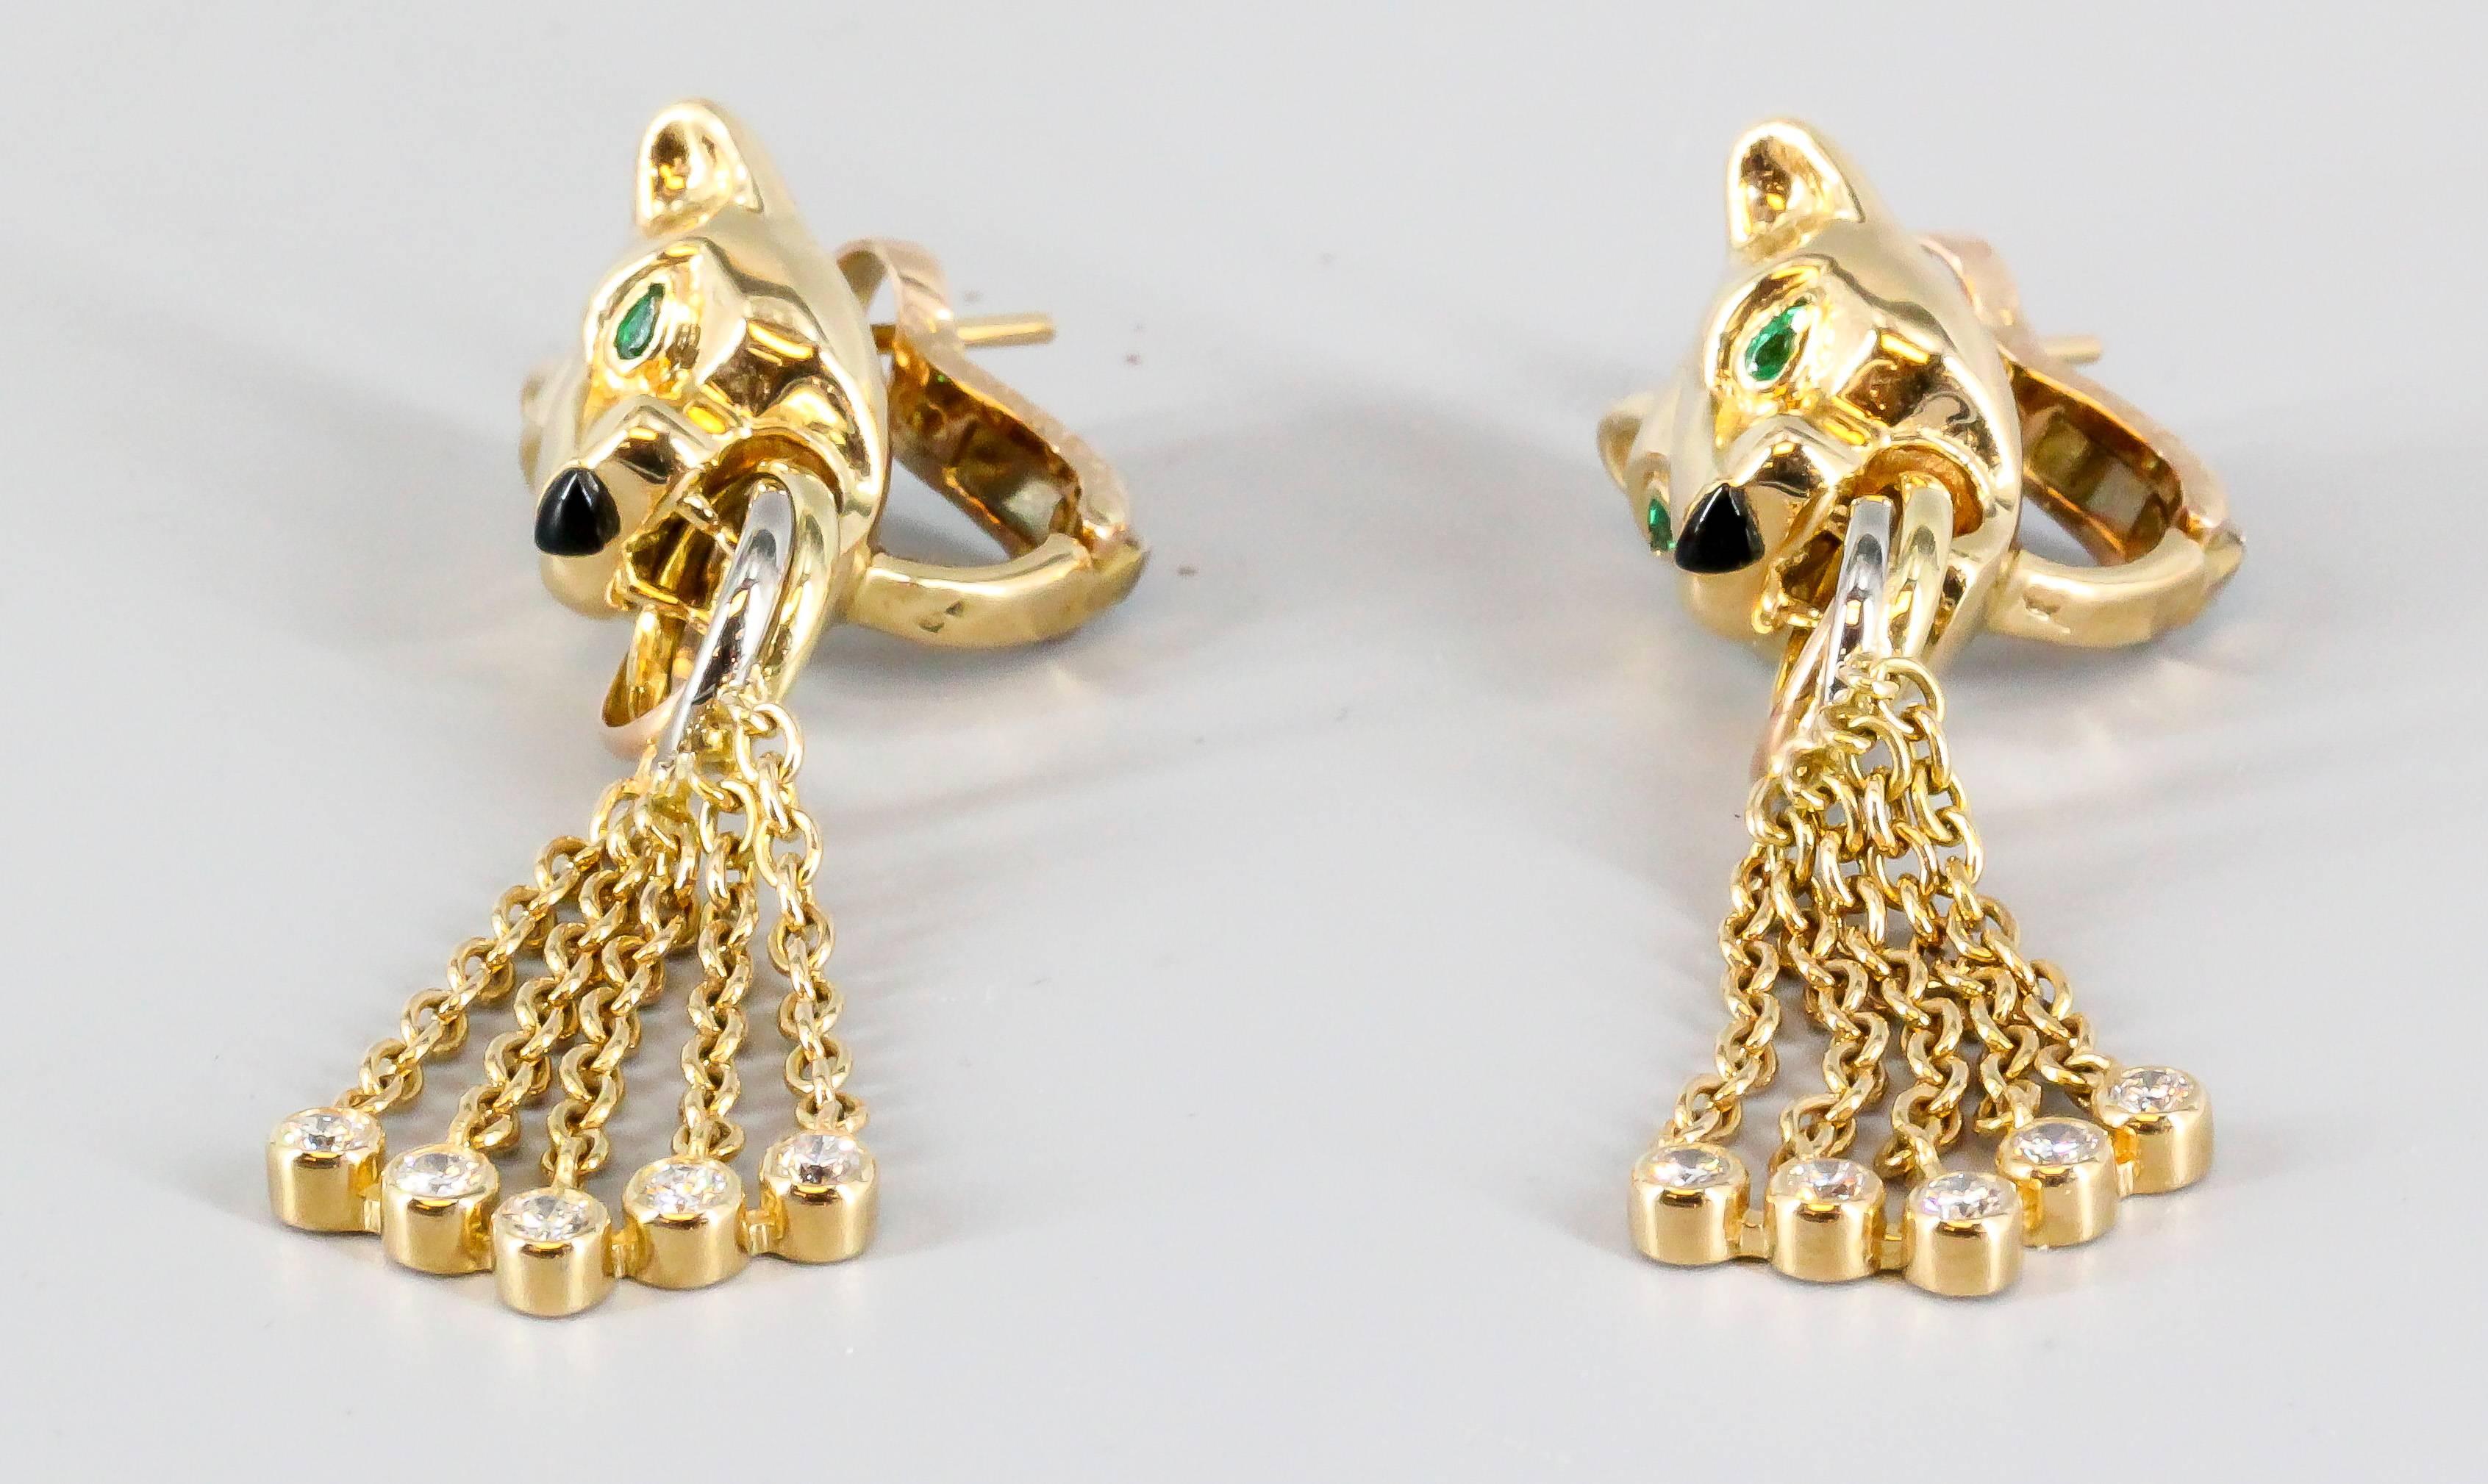 Fierce diamond, emerald, onyx and 18K yellow gold earrings from the Panther collection by Cartier. They feature high grade round brilliant cut diamonds, with the head of a panther with emerald eyes and an onyx nose. Beautifully made and highly